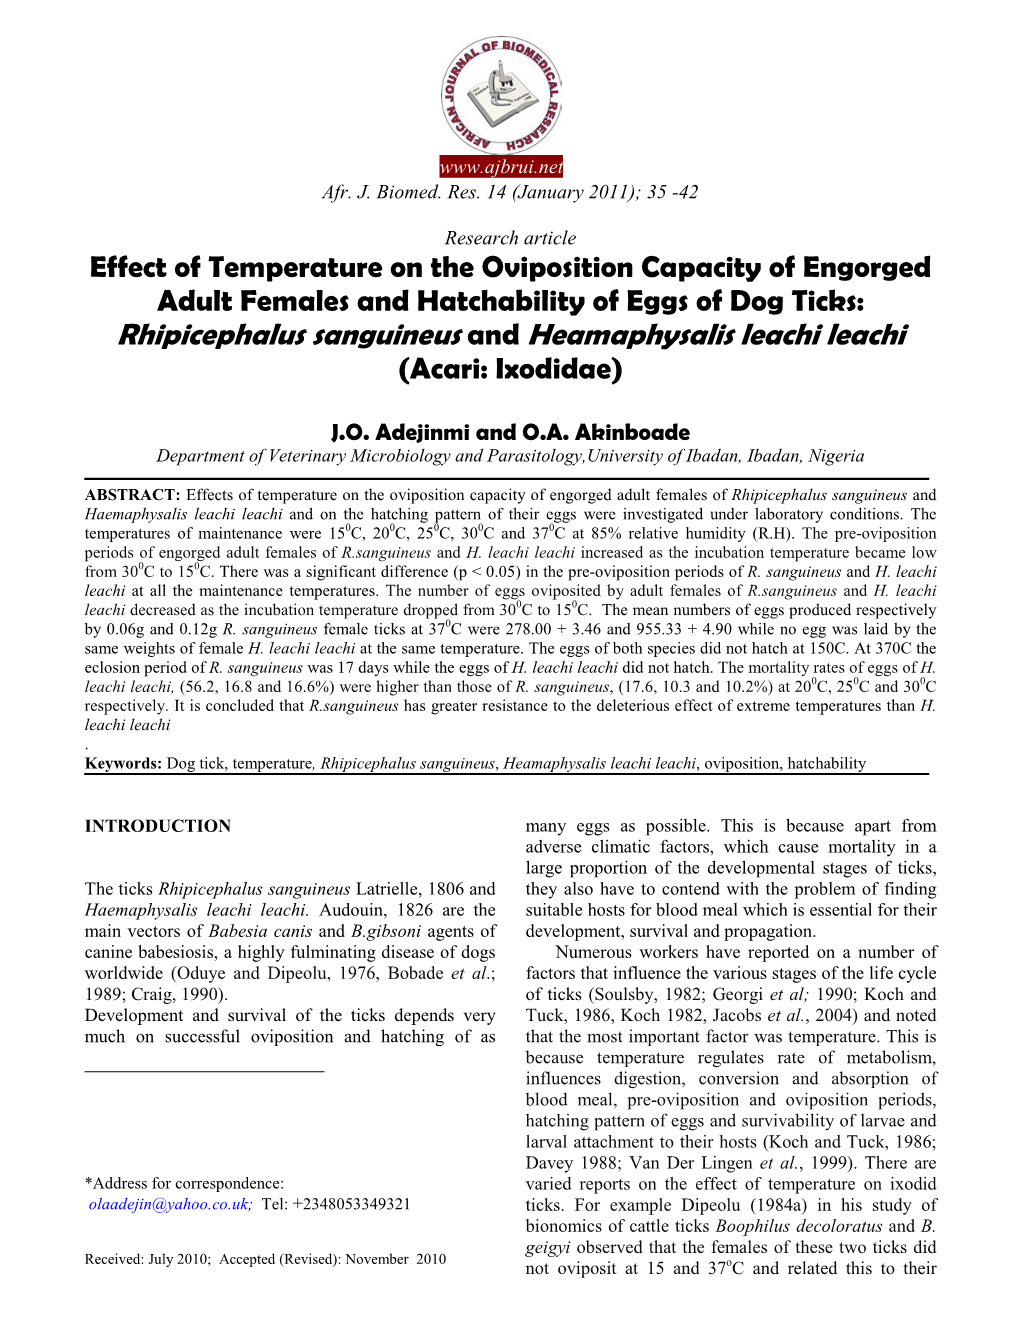 Effect of Temperature on the Oviposition Capacity of Engorged